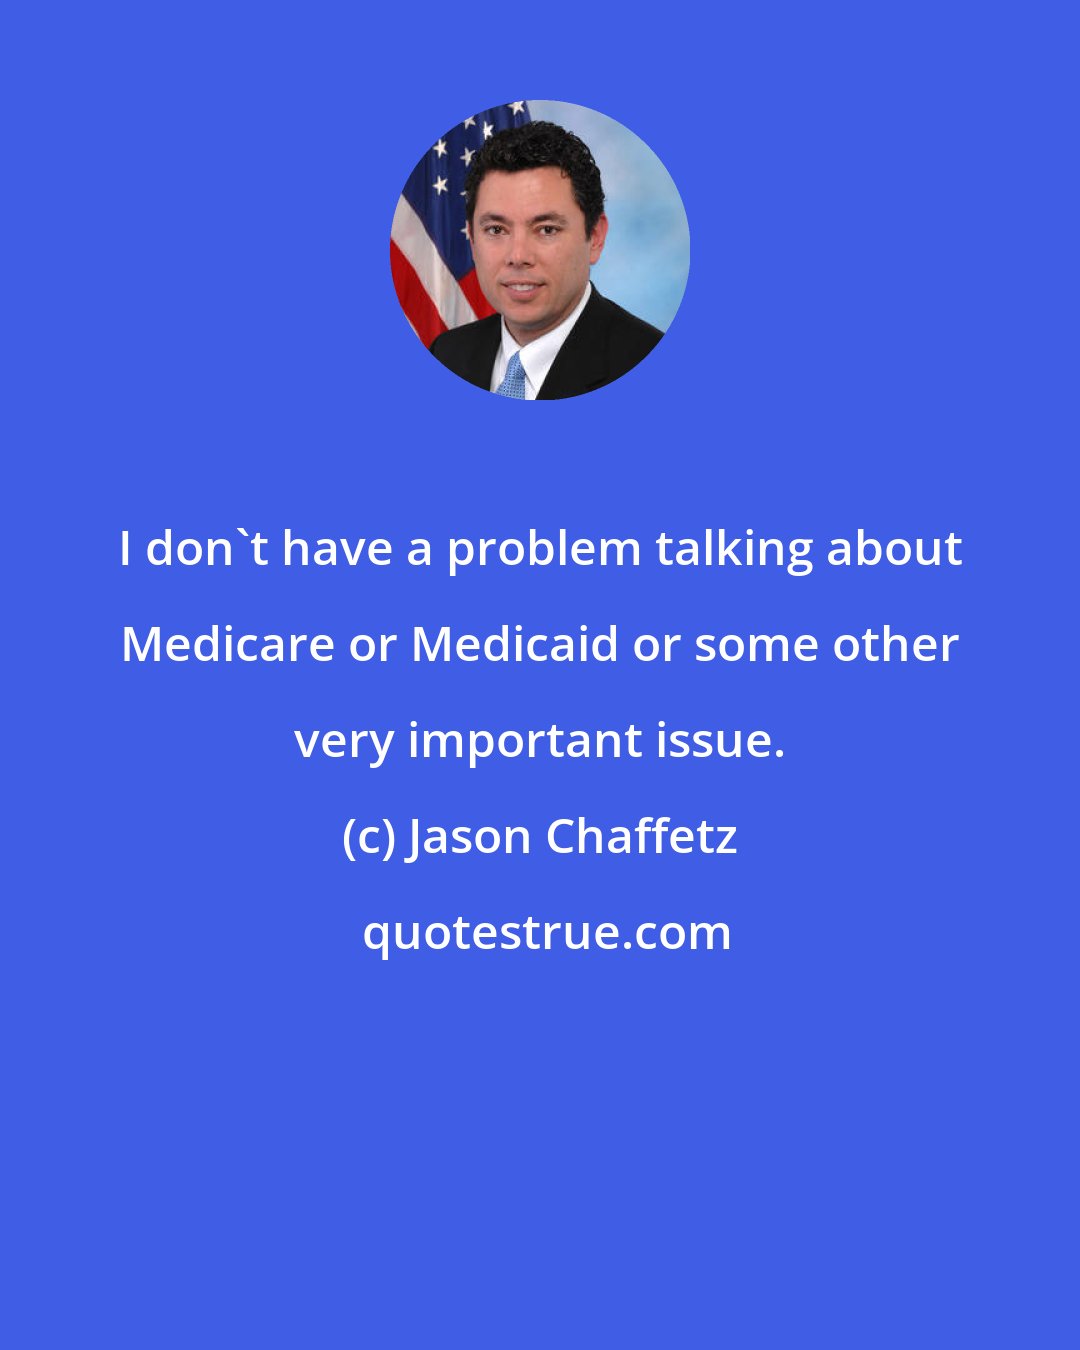 Jason Chaffetz: I don't have a problem talking about Medicare or Medicaid or some other very important issue.